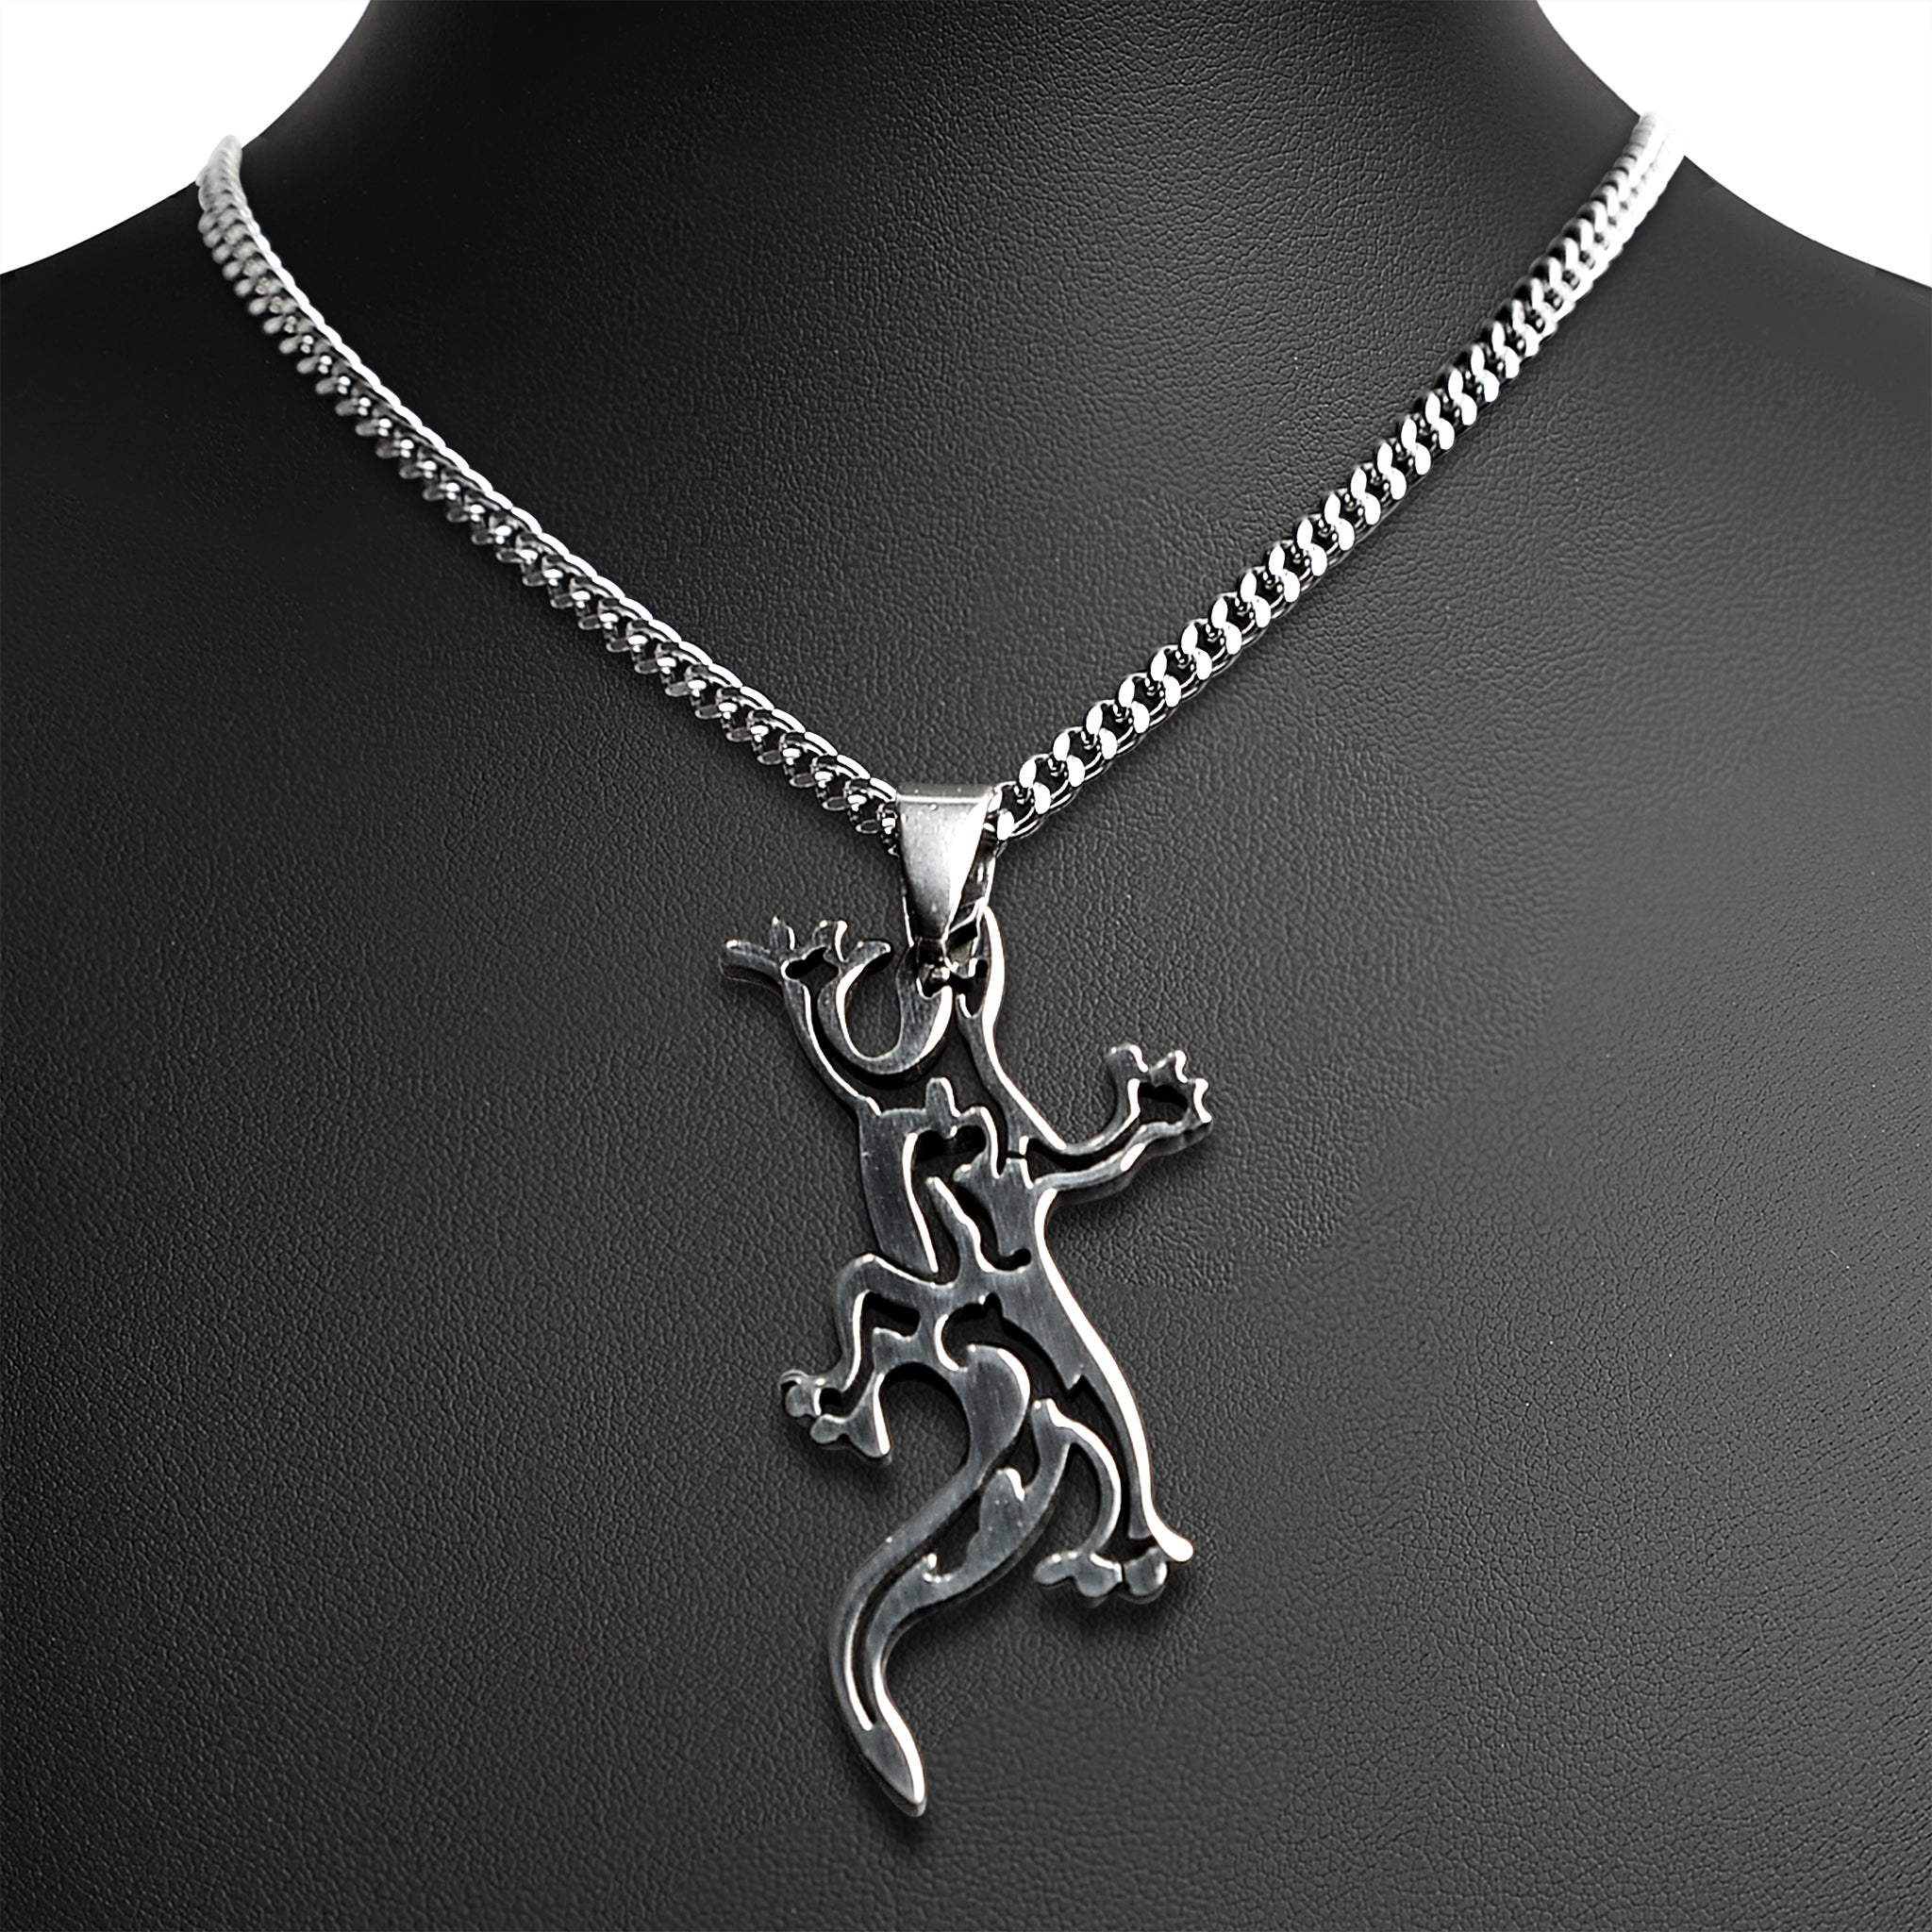 Stainless Steel Tribal Lizard Curb Chain NECKLACE / PDK0205-RTL